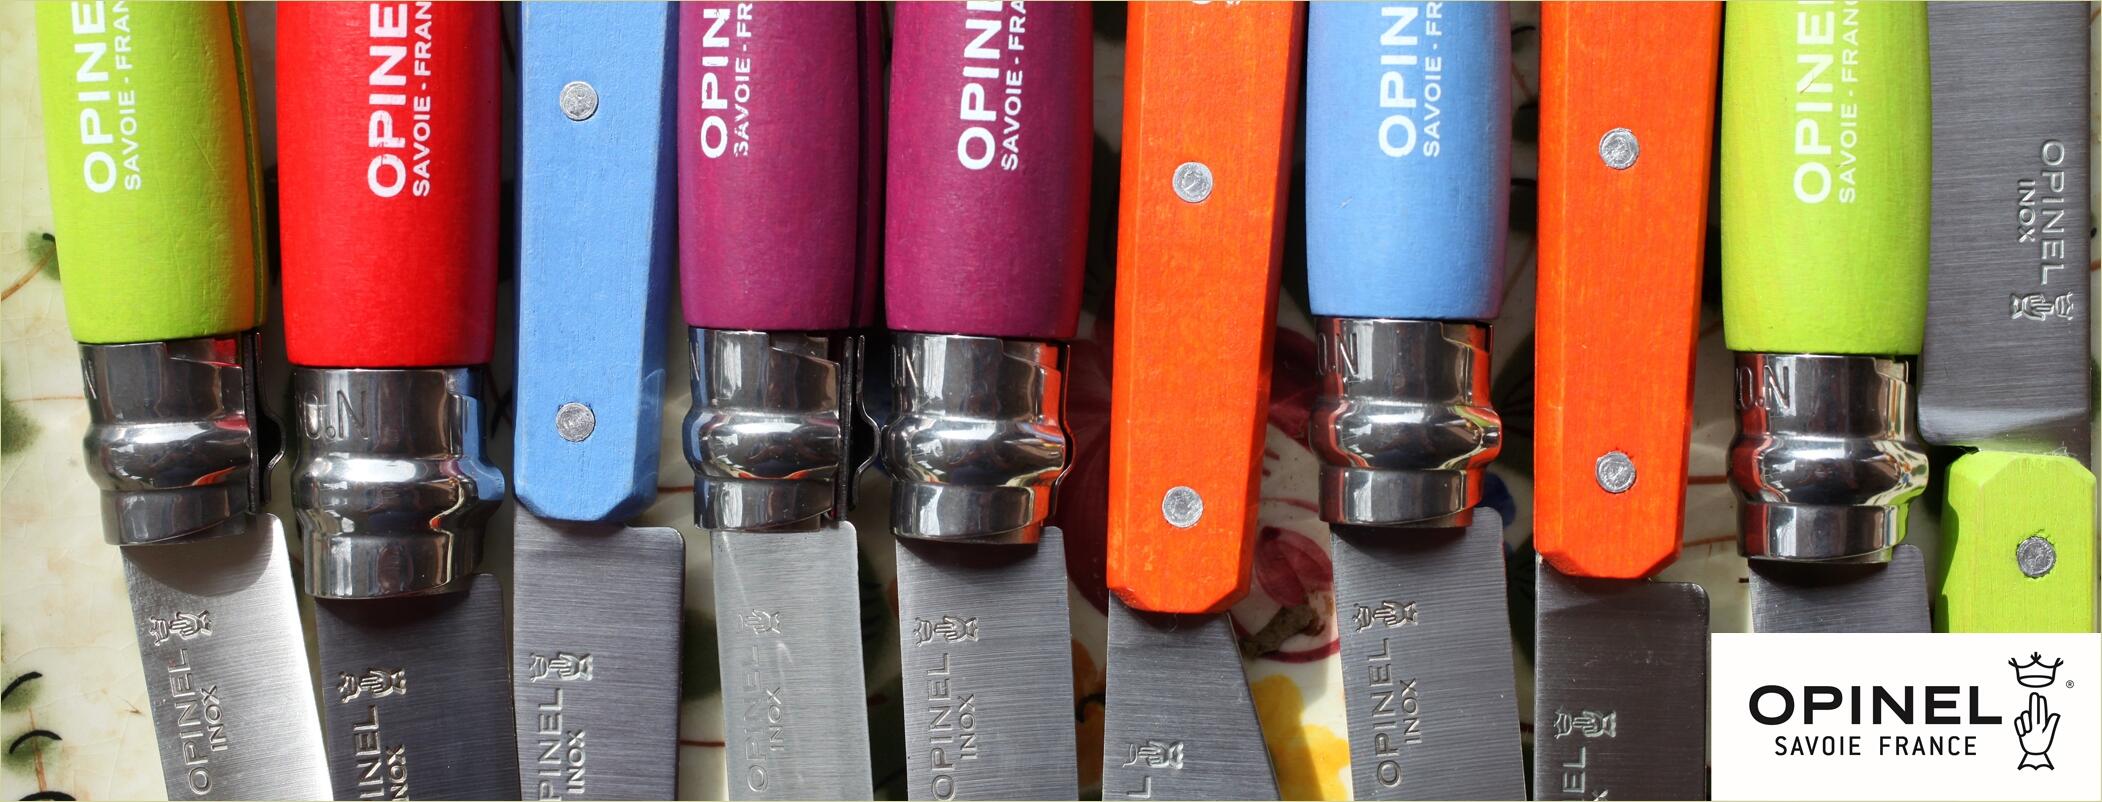 Opinel Messersets